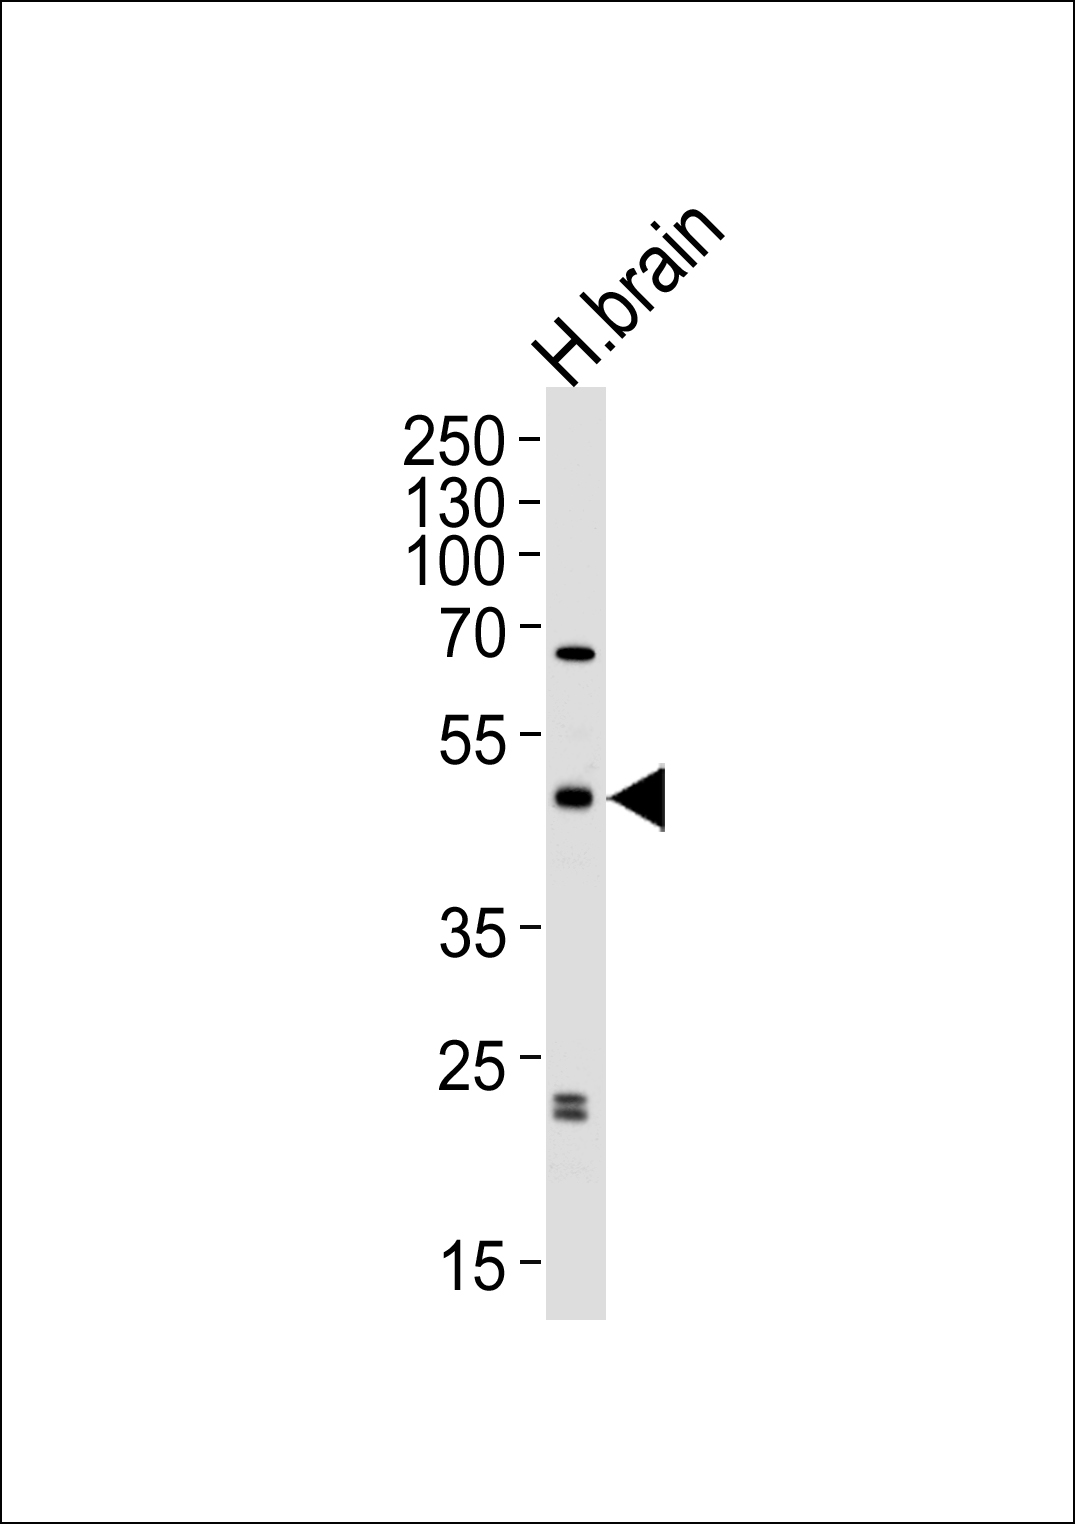 Western blot analysis of lysate from human brain tissue lysate, using ABHD12 Antibody (N-term)(Cat. #AP8904a). AP8904a was diluted at 1:1000 at each lane. A goat anti-rabbit IgG H&L(HRP) at 1:5000 dilution was used as the secondary antibody. Lysate at 35ug per lane. 